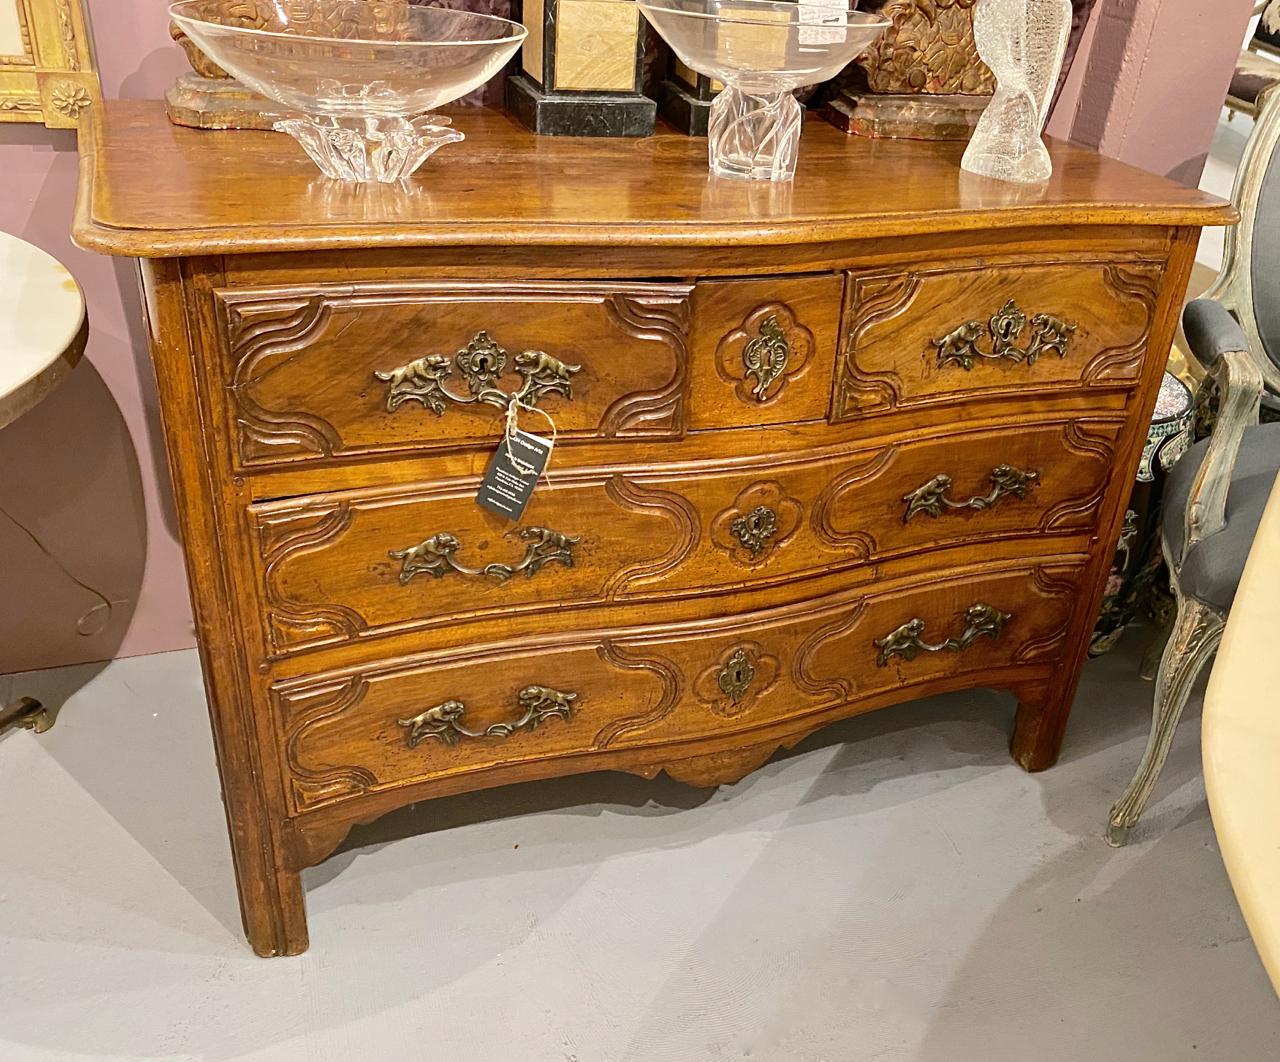 This is a fine example of a mid-18th century Louis XV provincial serpentine walnut chest of drawers. The chest is in overall very good condition. The chest features a serpentine front, molded top, 4 carved drawers with a 